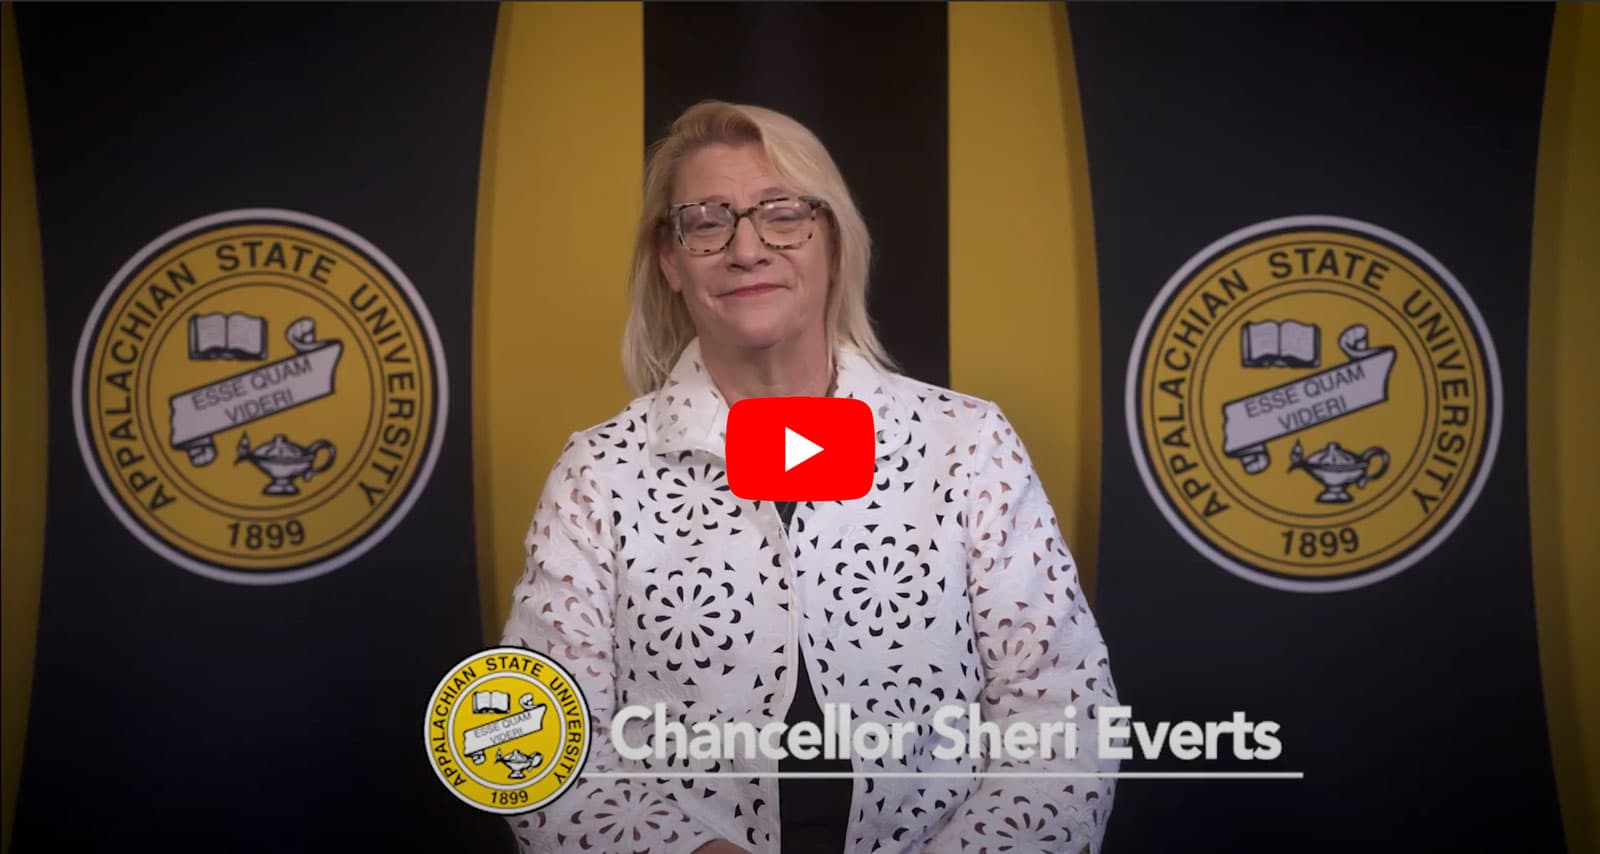 Chancellor Welcome Video Message